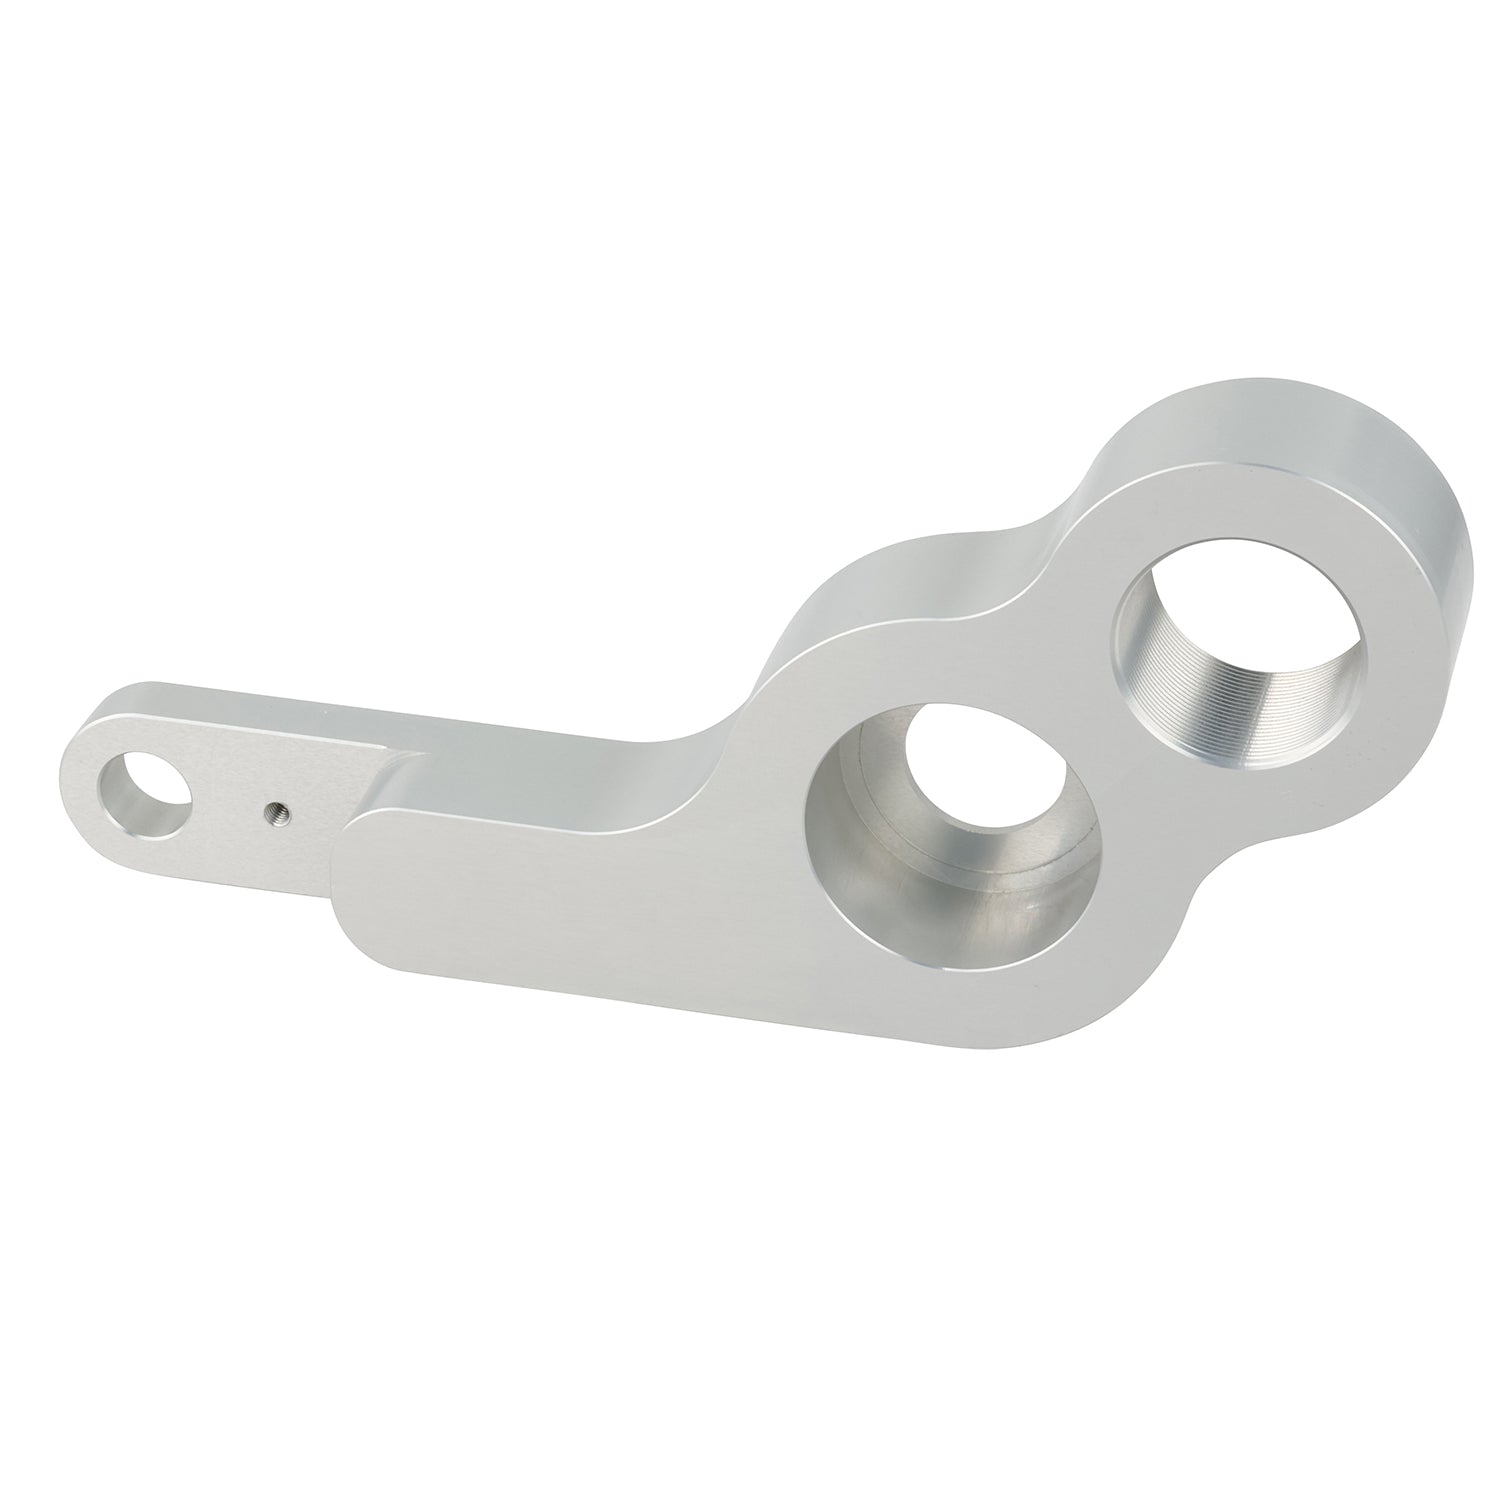 Grey machined 1st op swing arm part made of anodized aluminum on white background.